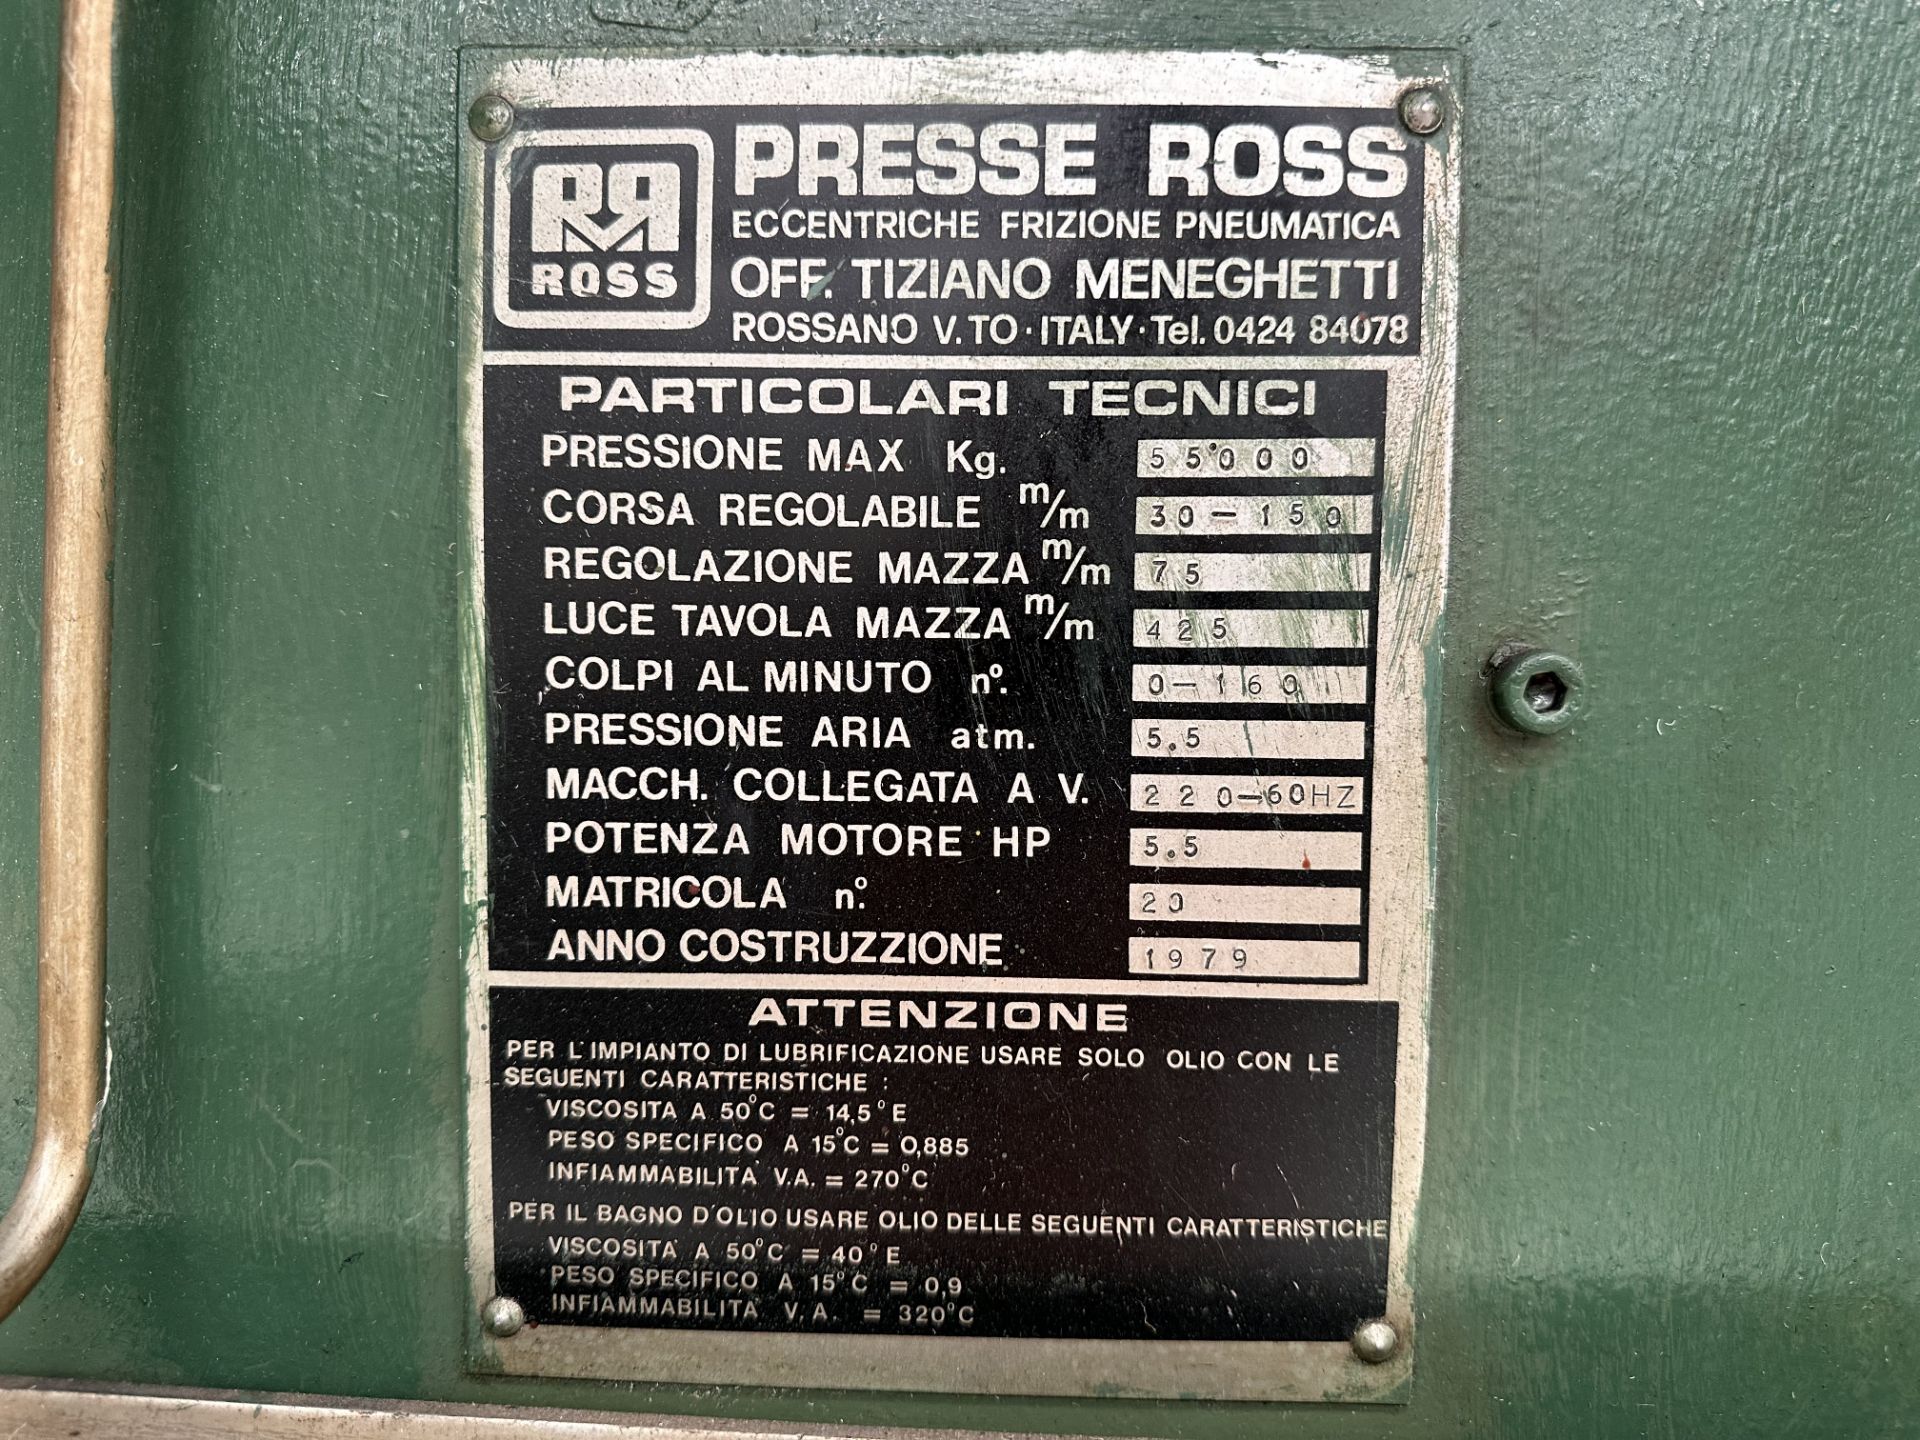 Ross 55 tonDie Stamping Press, Model 55, Serial No. 20, Year 1979, 440V, 5.5 hp motor, Pneumatic cl - Image 10 of 11